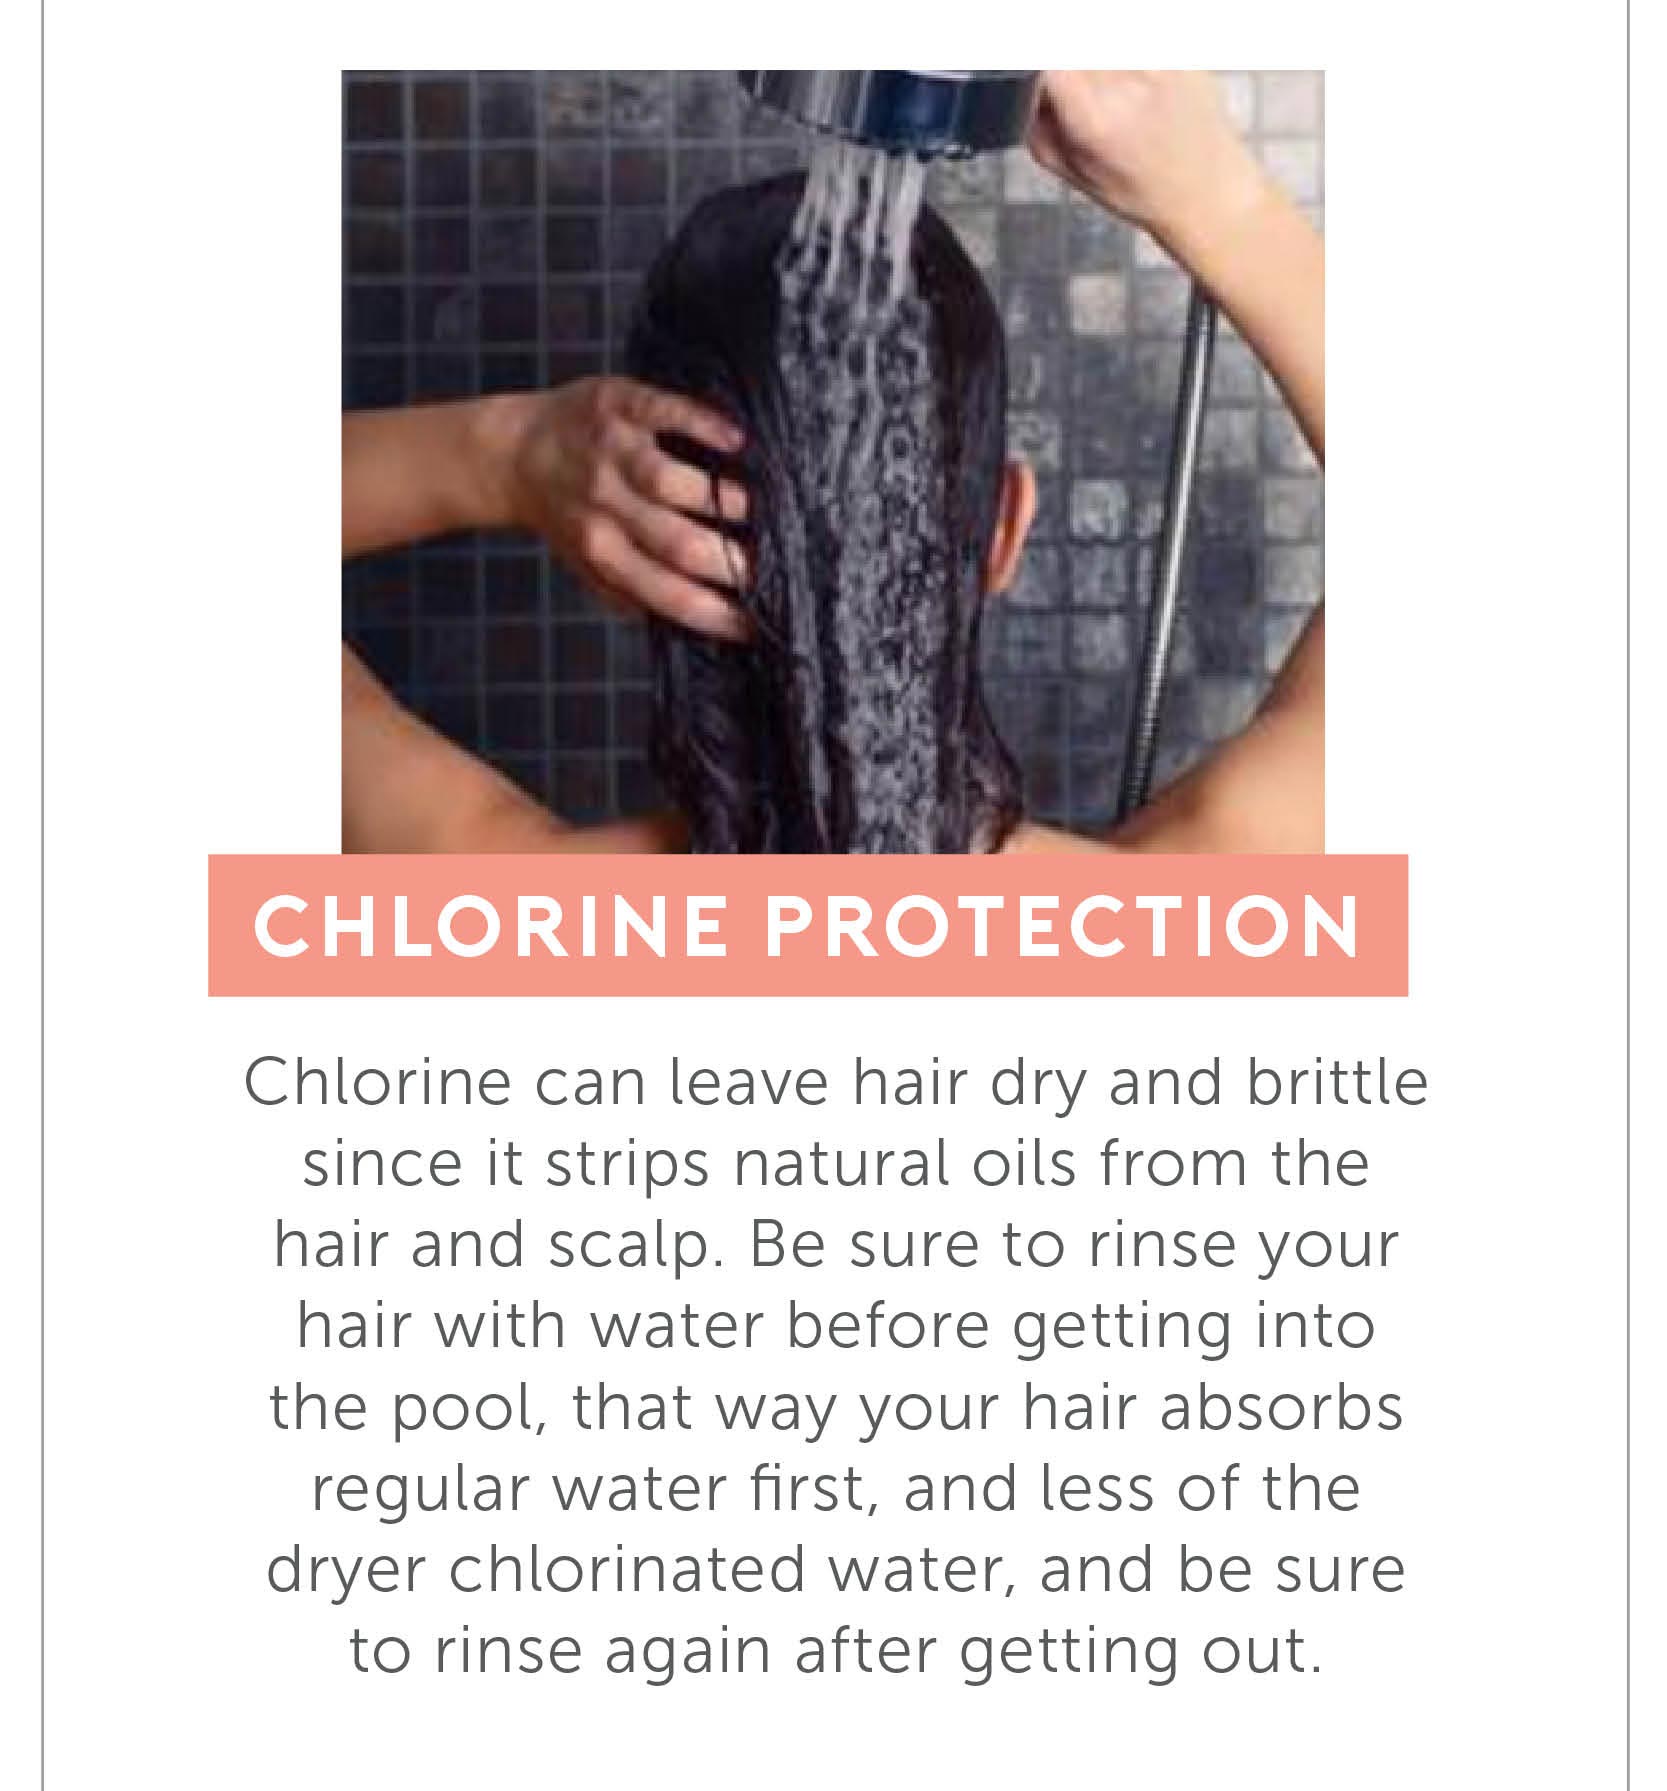 Chlorine Protection - Chlorine can leave hair dry and brittle since it strips natural oils from the hair and scalp. Be sure to rinse your hair with water before getting into the pool, that way your hair absorbs regular water first, and less of the dryer chlorinated water, and be sure to rinse again after getting out.